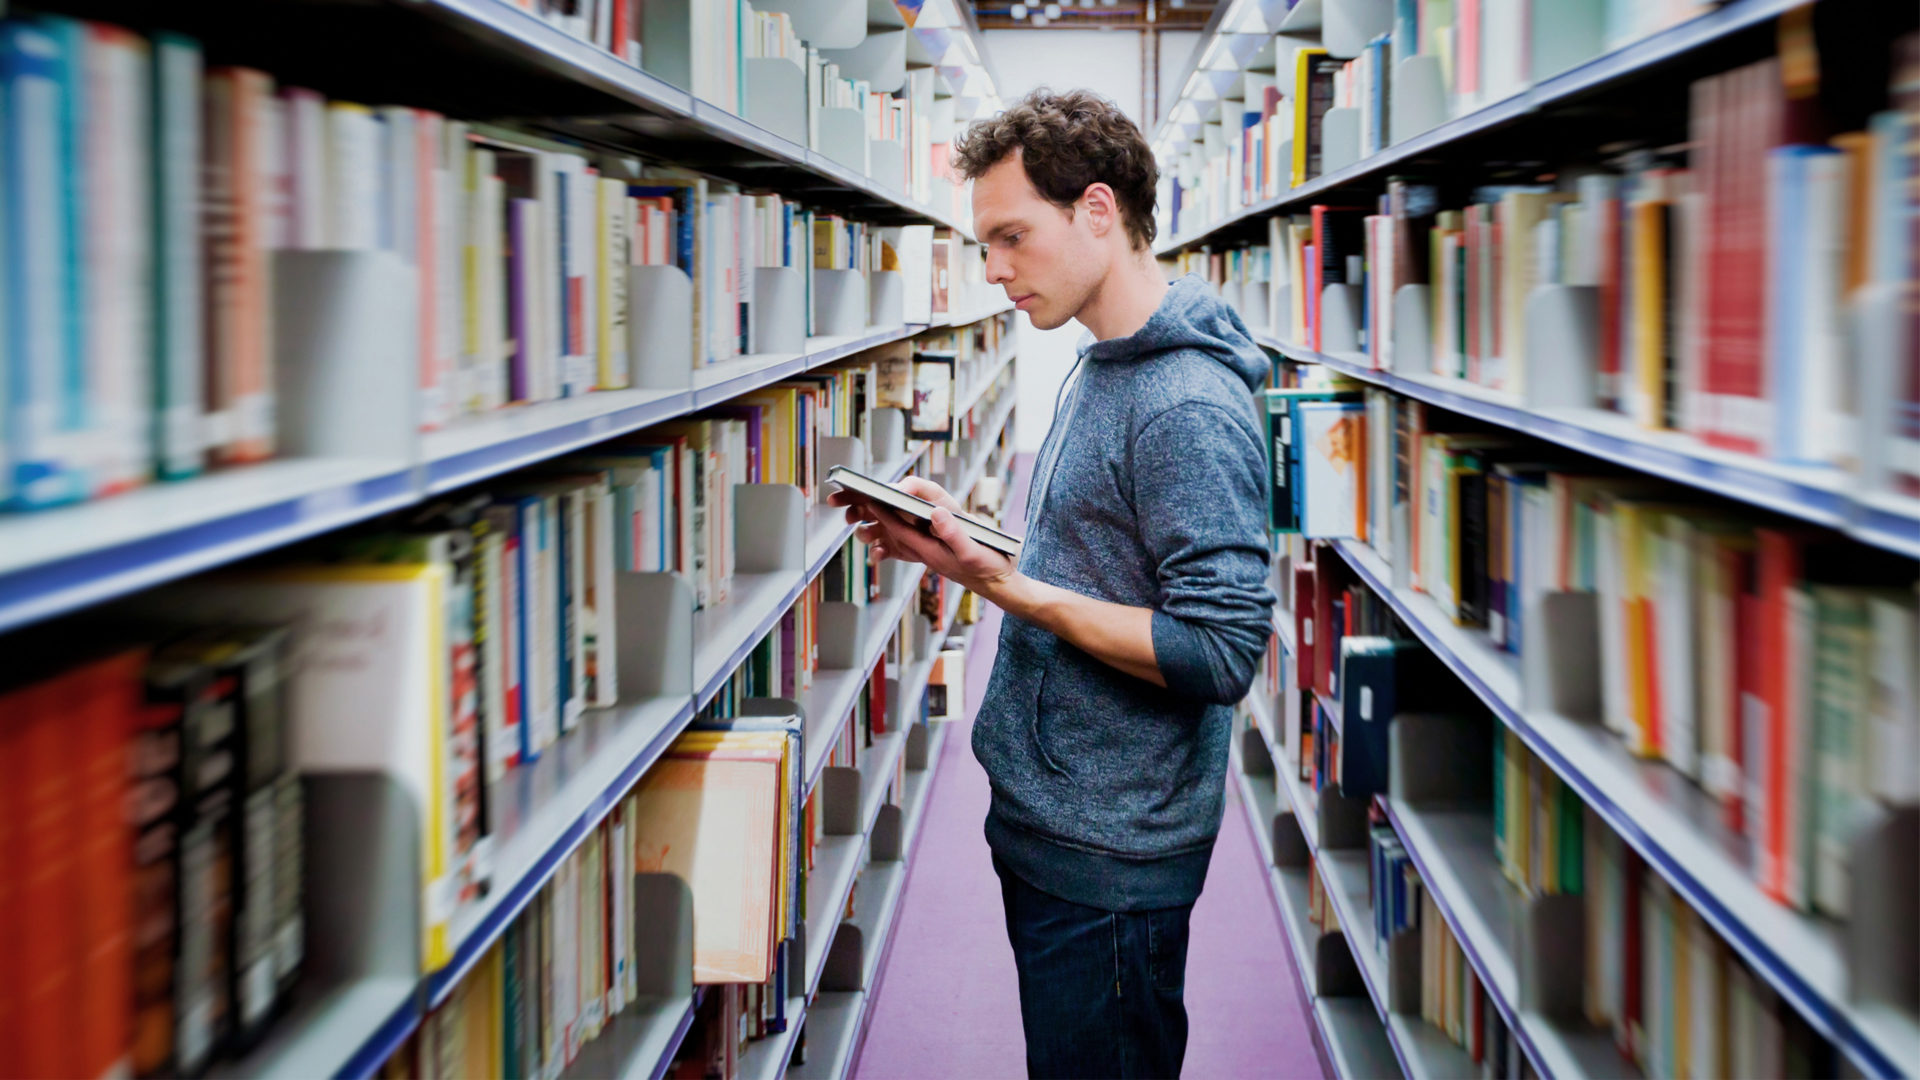 A man in his twenties, wearing a sweatshirt, is standing between two library shelves. He is reading a book.